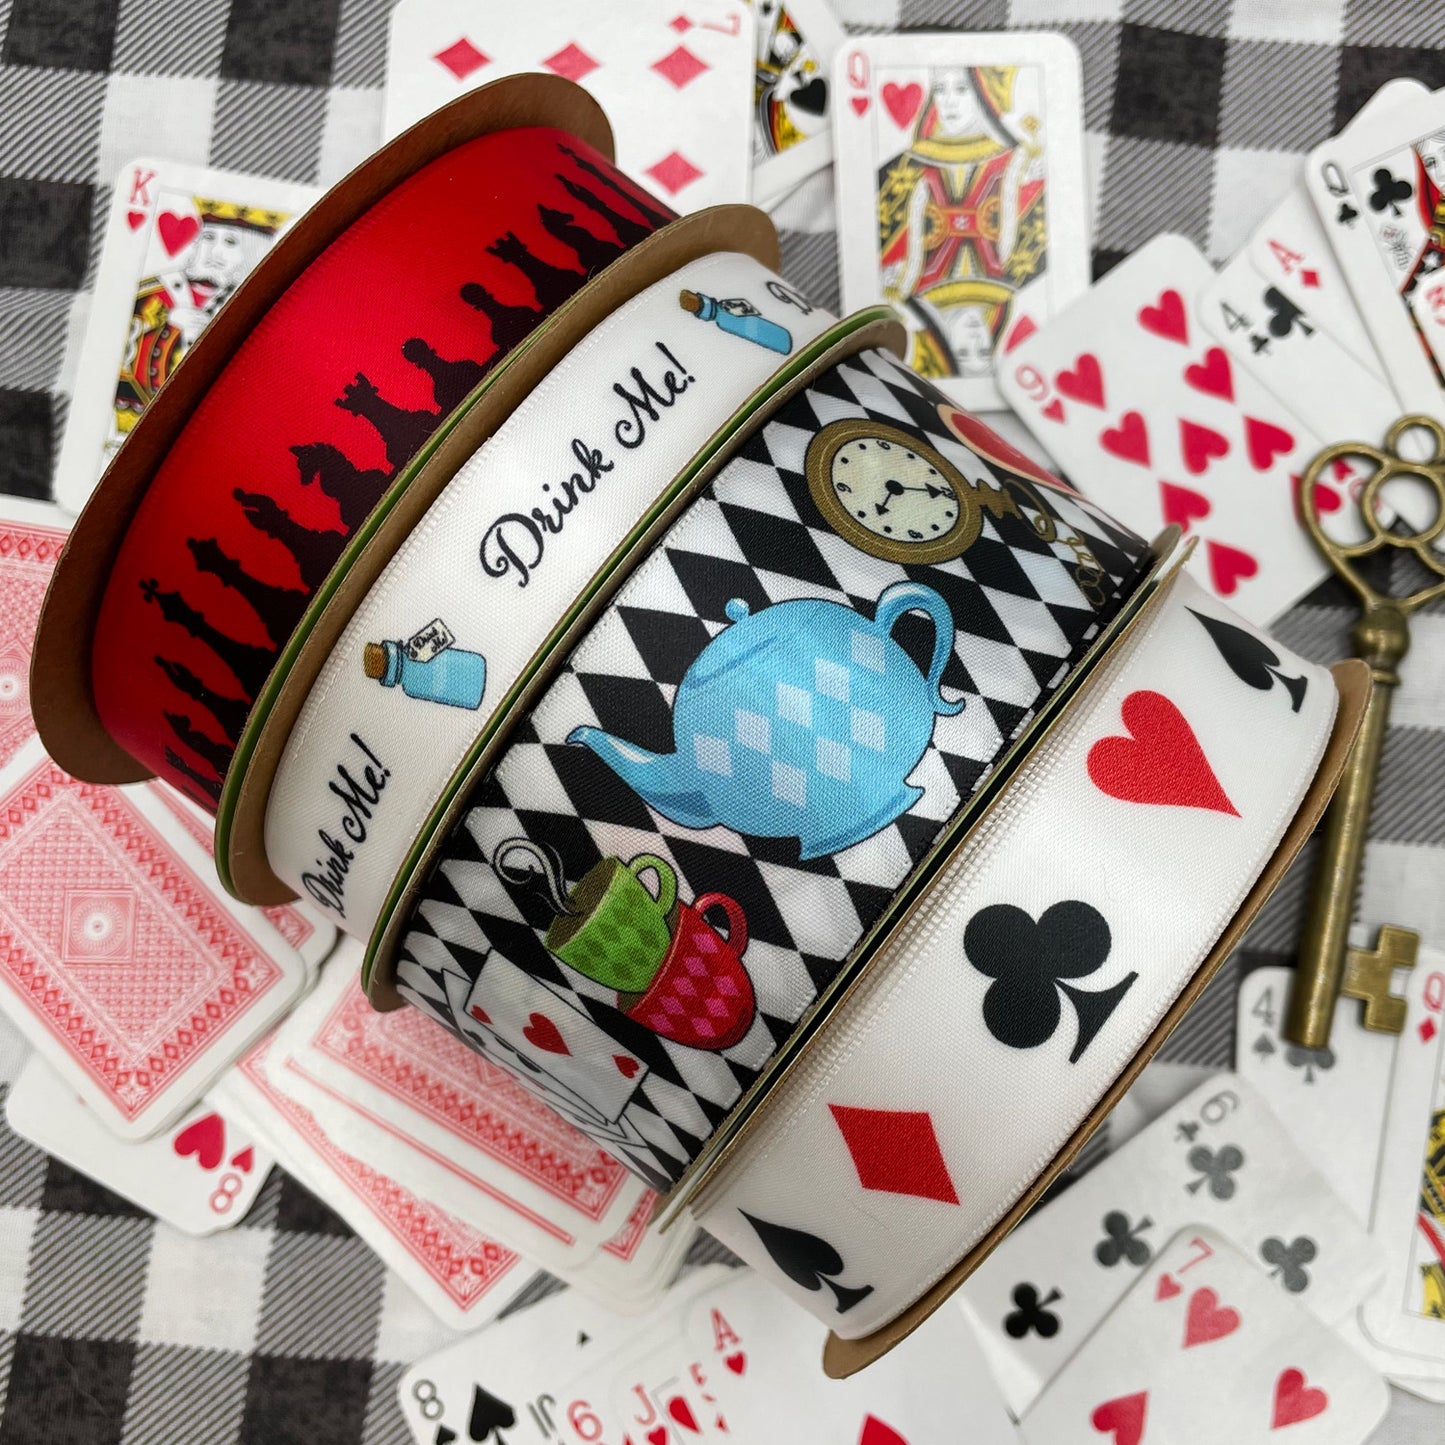 Alice in Wonderland blue "Drink Me" bottle ribbon with black text printed on 5/8" white single face satin